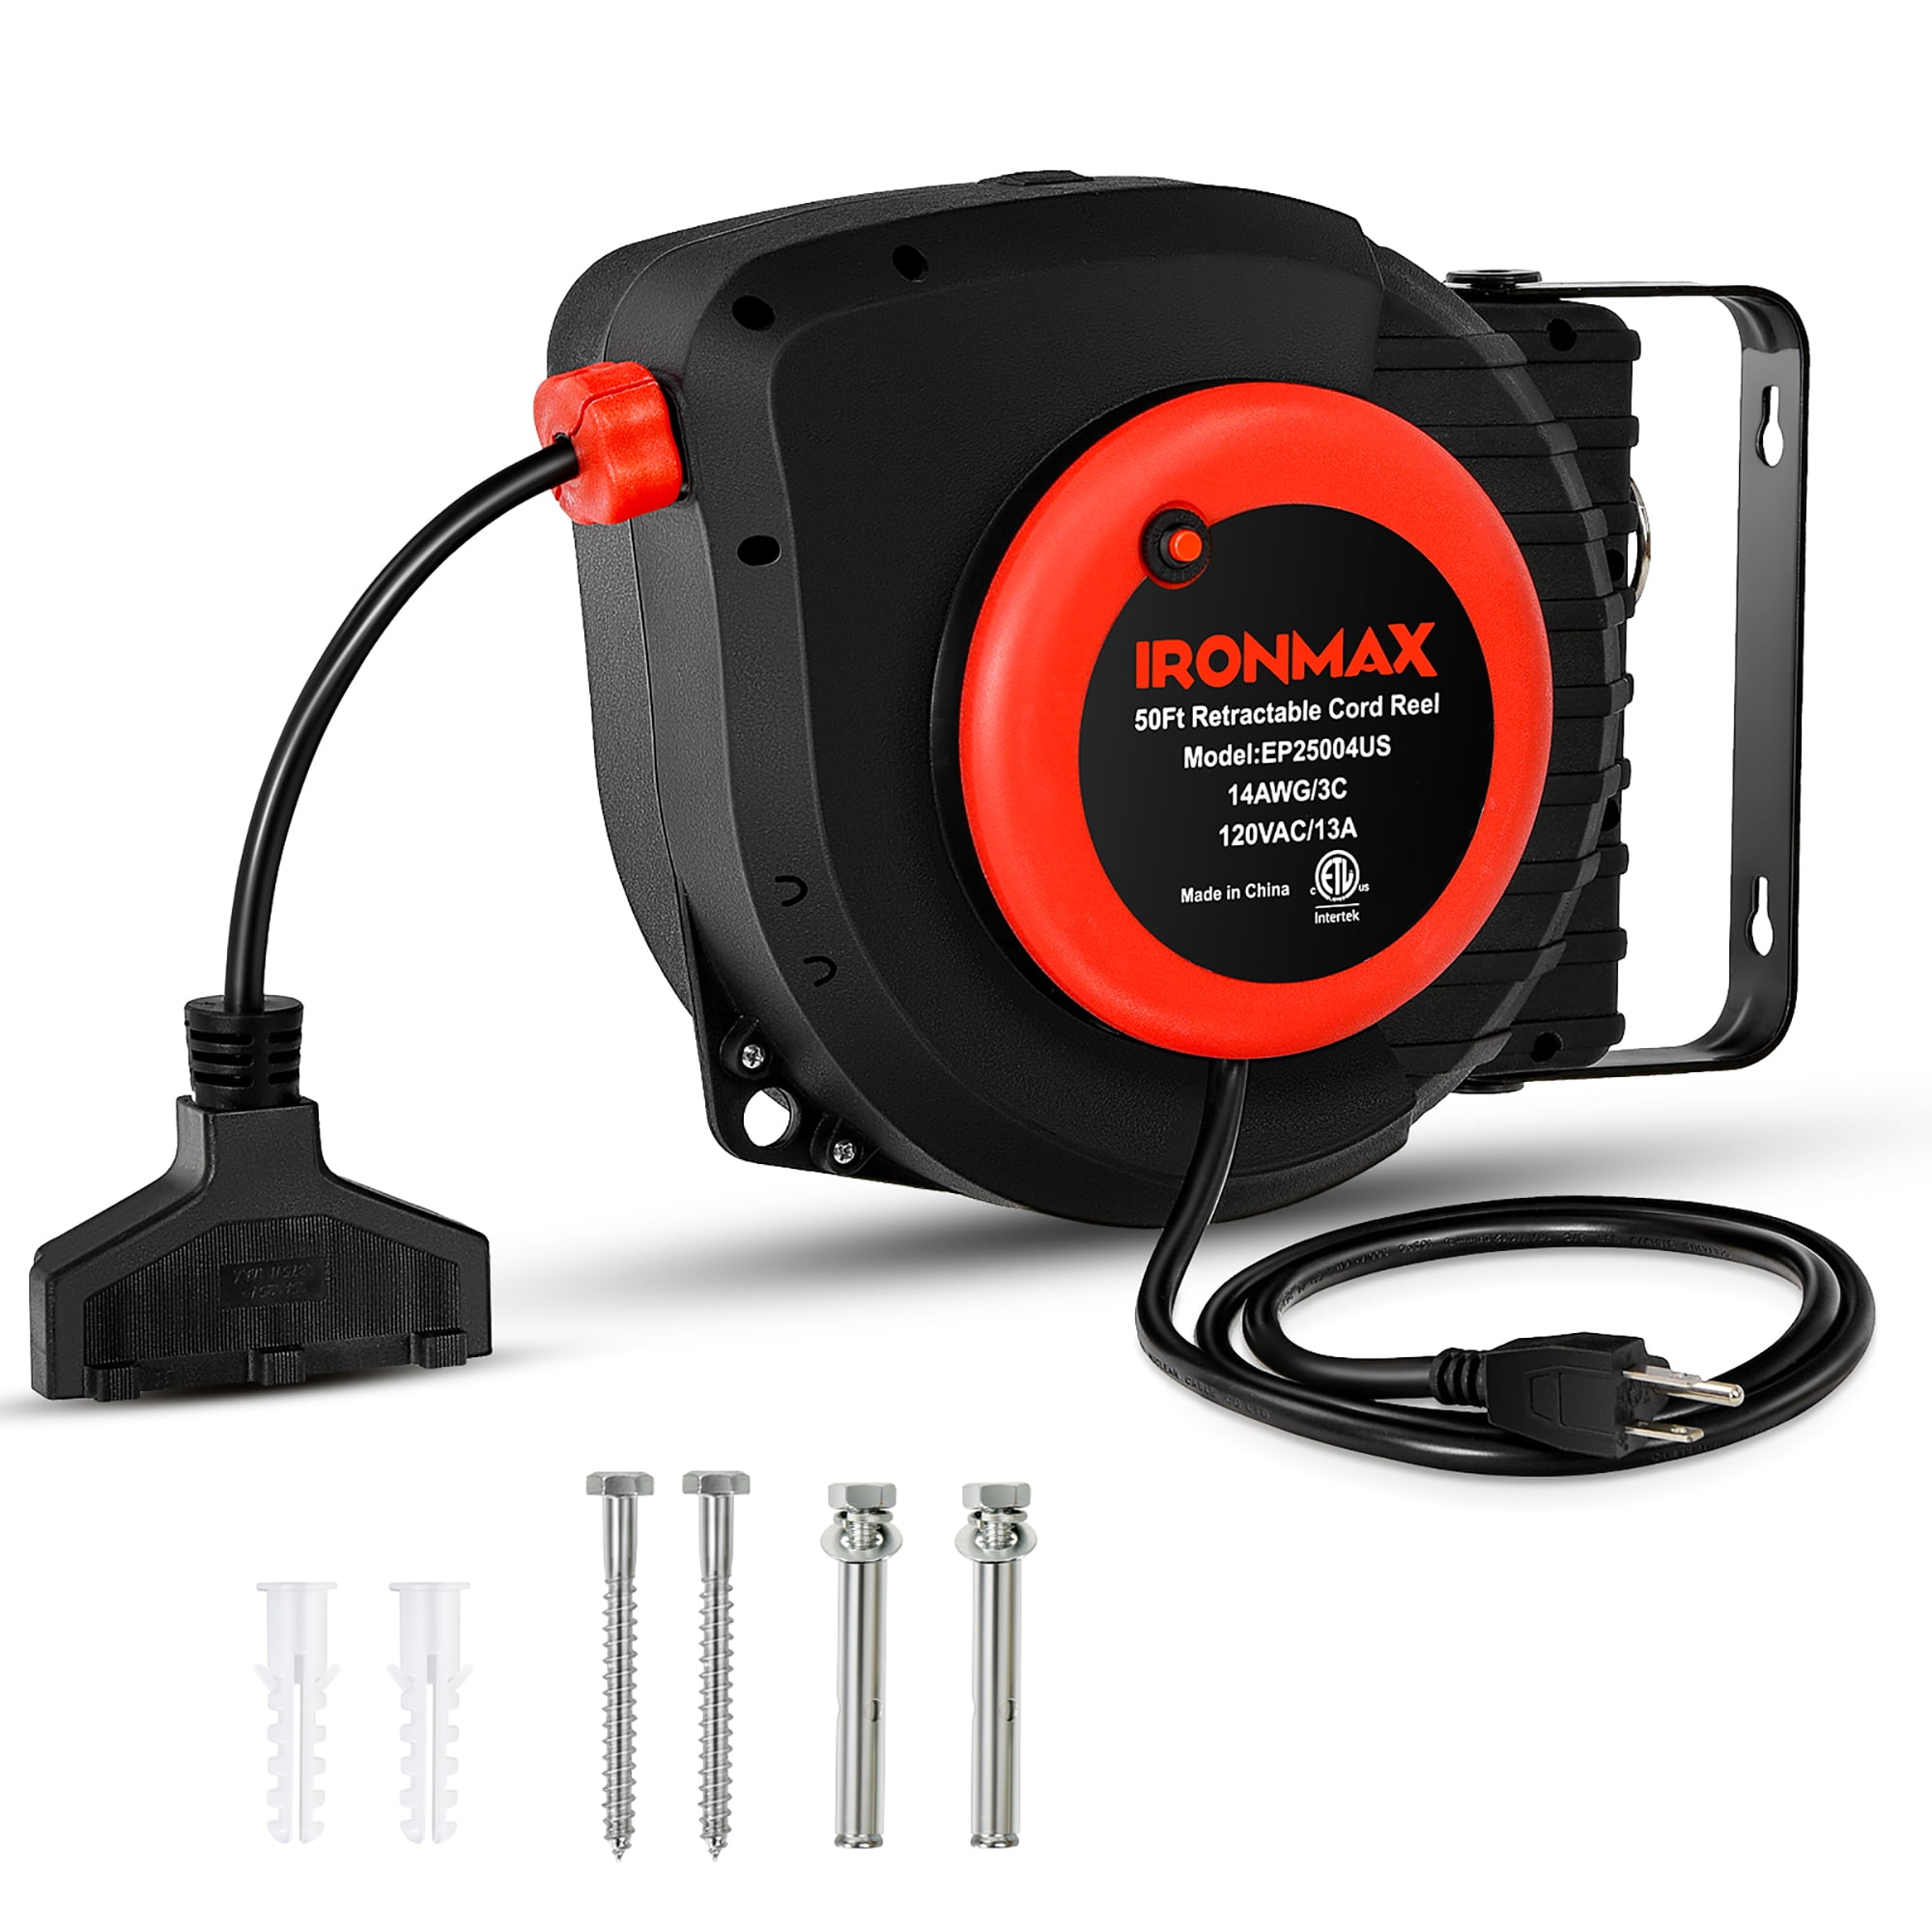 IRONMAx 50ft Retractable Extension Cord Reel Ceiling or Wall Mount